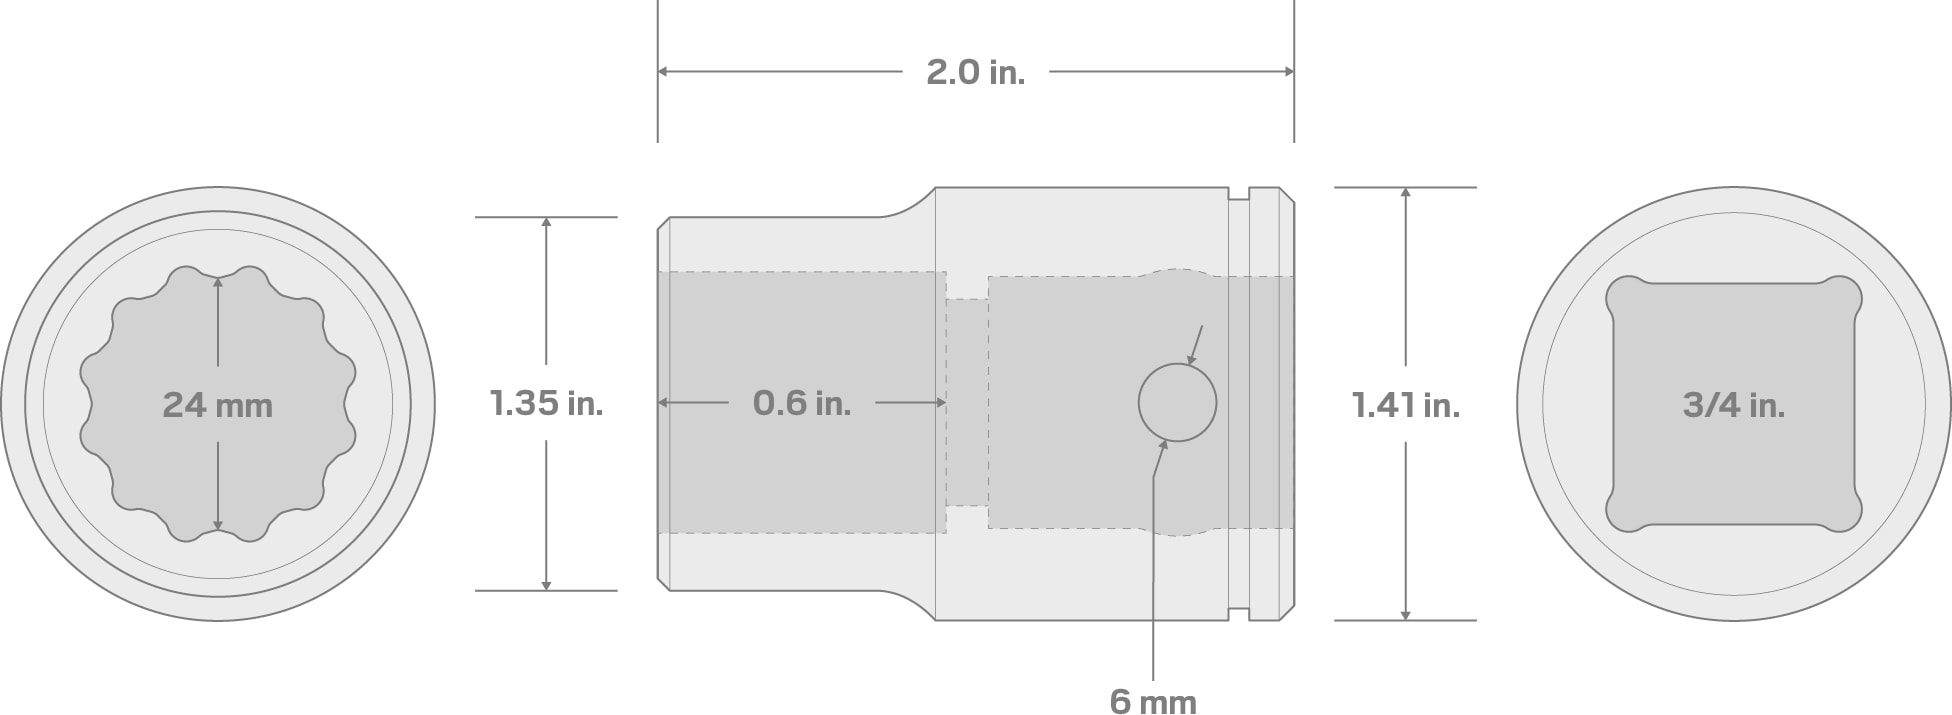 Specs for 3/4 Inch Drive x 24 mm 12-Point Socket